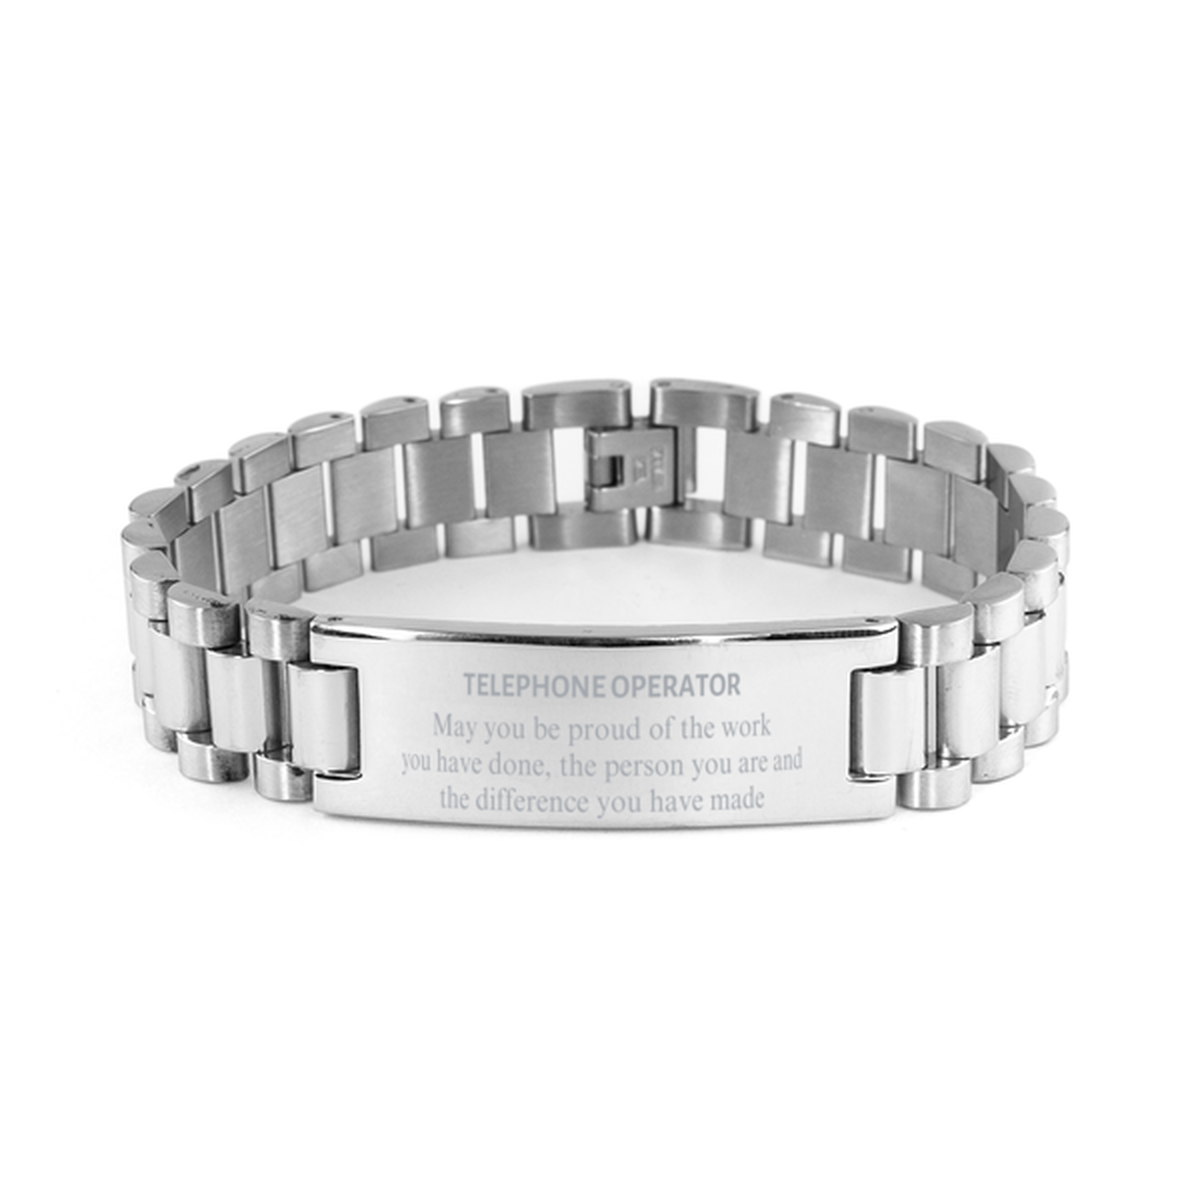 Telephone Operator May you be proud of the work you have done, Retirement Telephone Operator Ladder Stainless Steel Bracelet for Colleague Appreciation Gifts Amazing for Telephone Operator